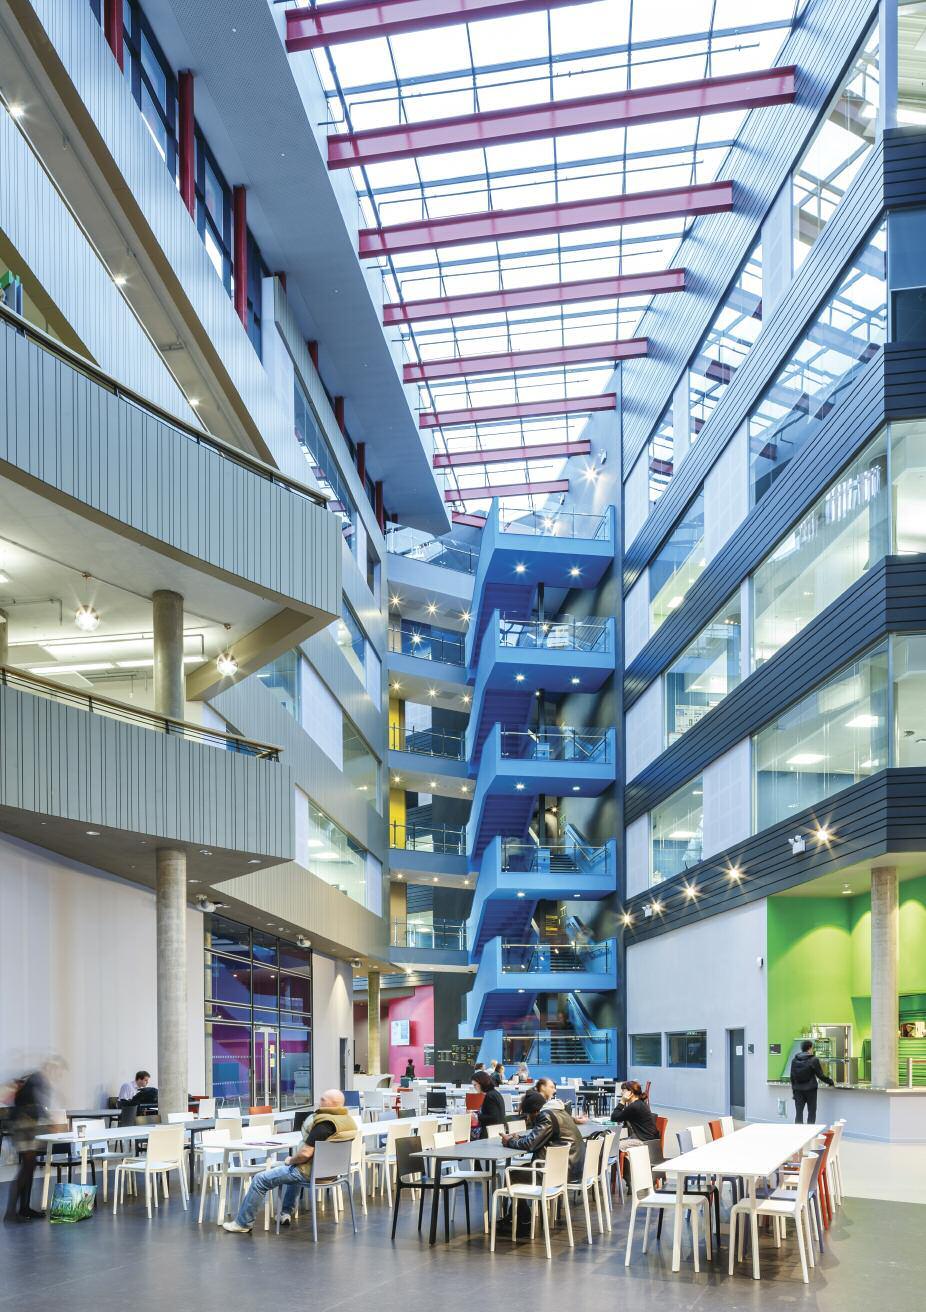 Case Study - Cardiff and Vale College Kawneer systems hail a new future for education in Wales.